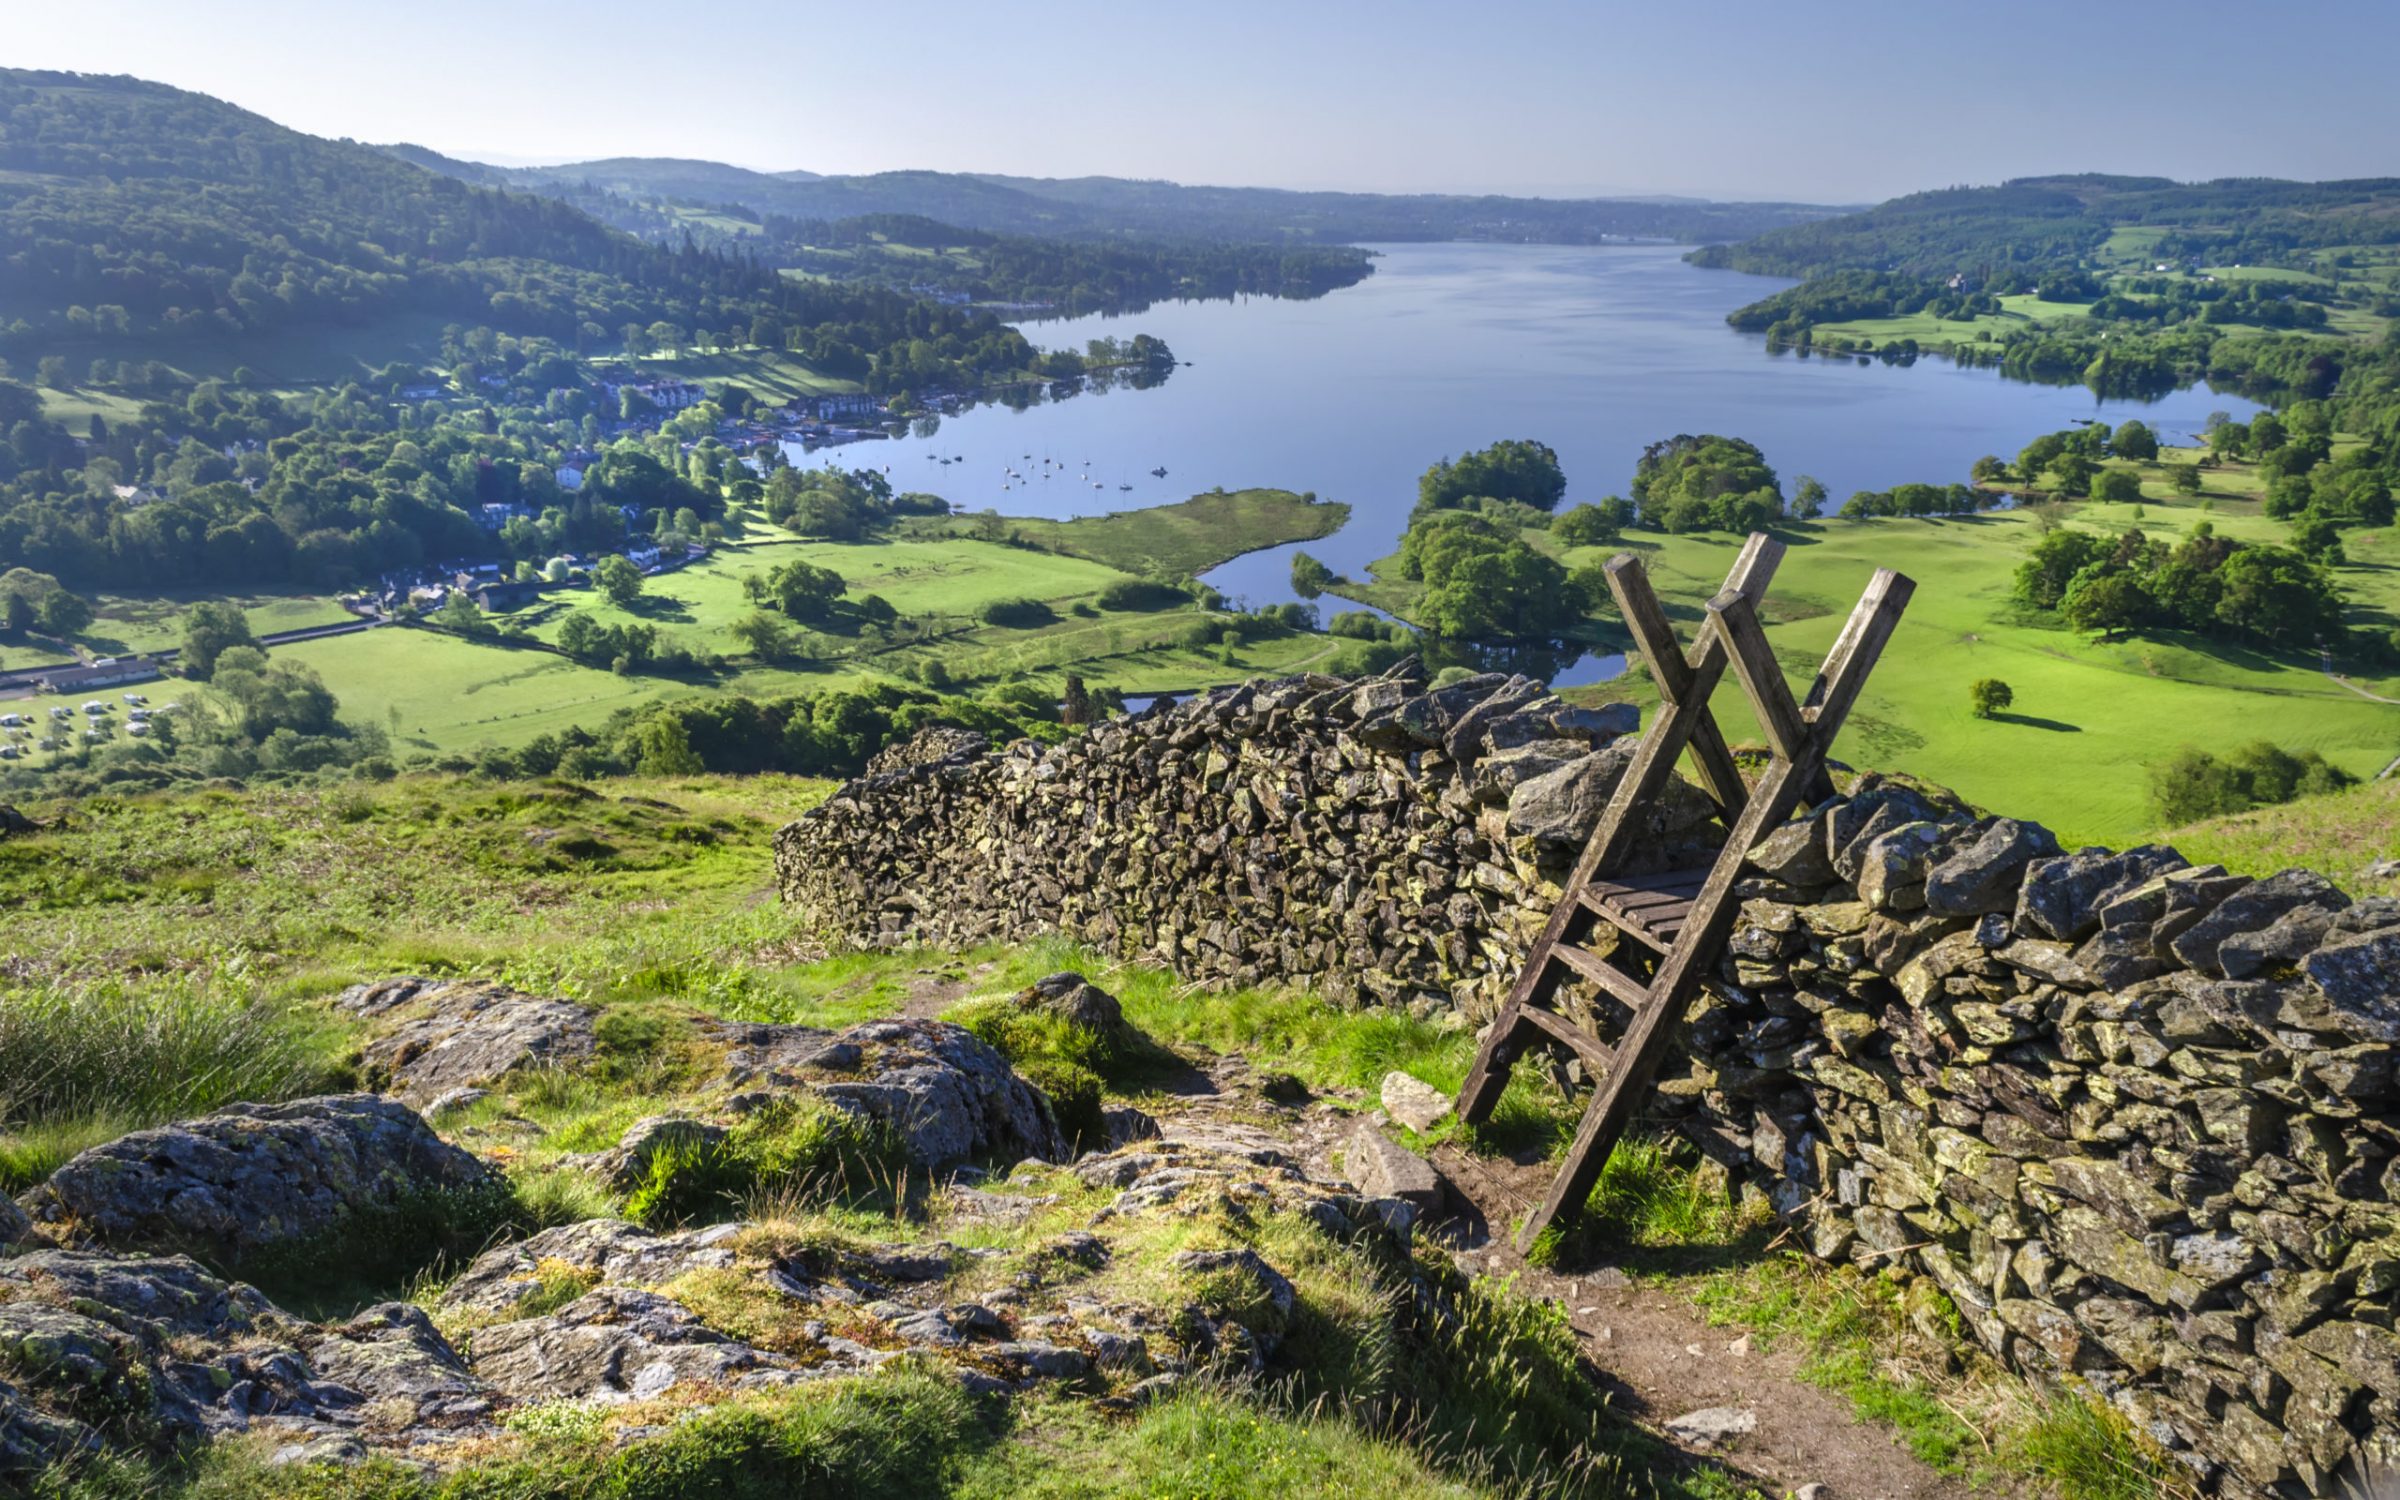 A morning shot of Lake Windermere showing the stone walling and the stile providing passage over the wall.